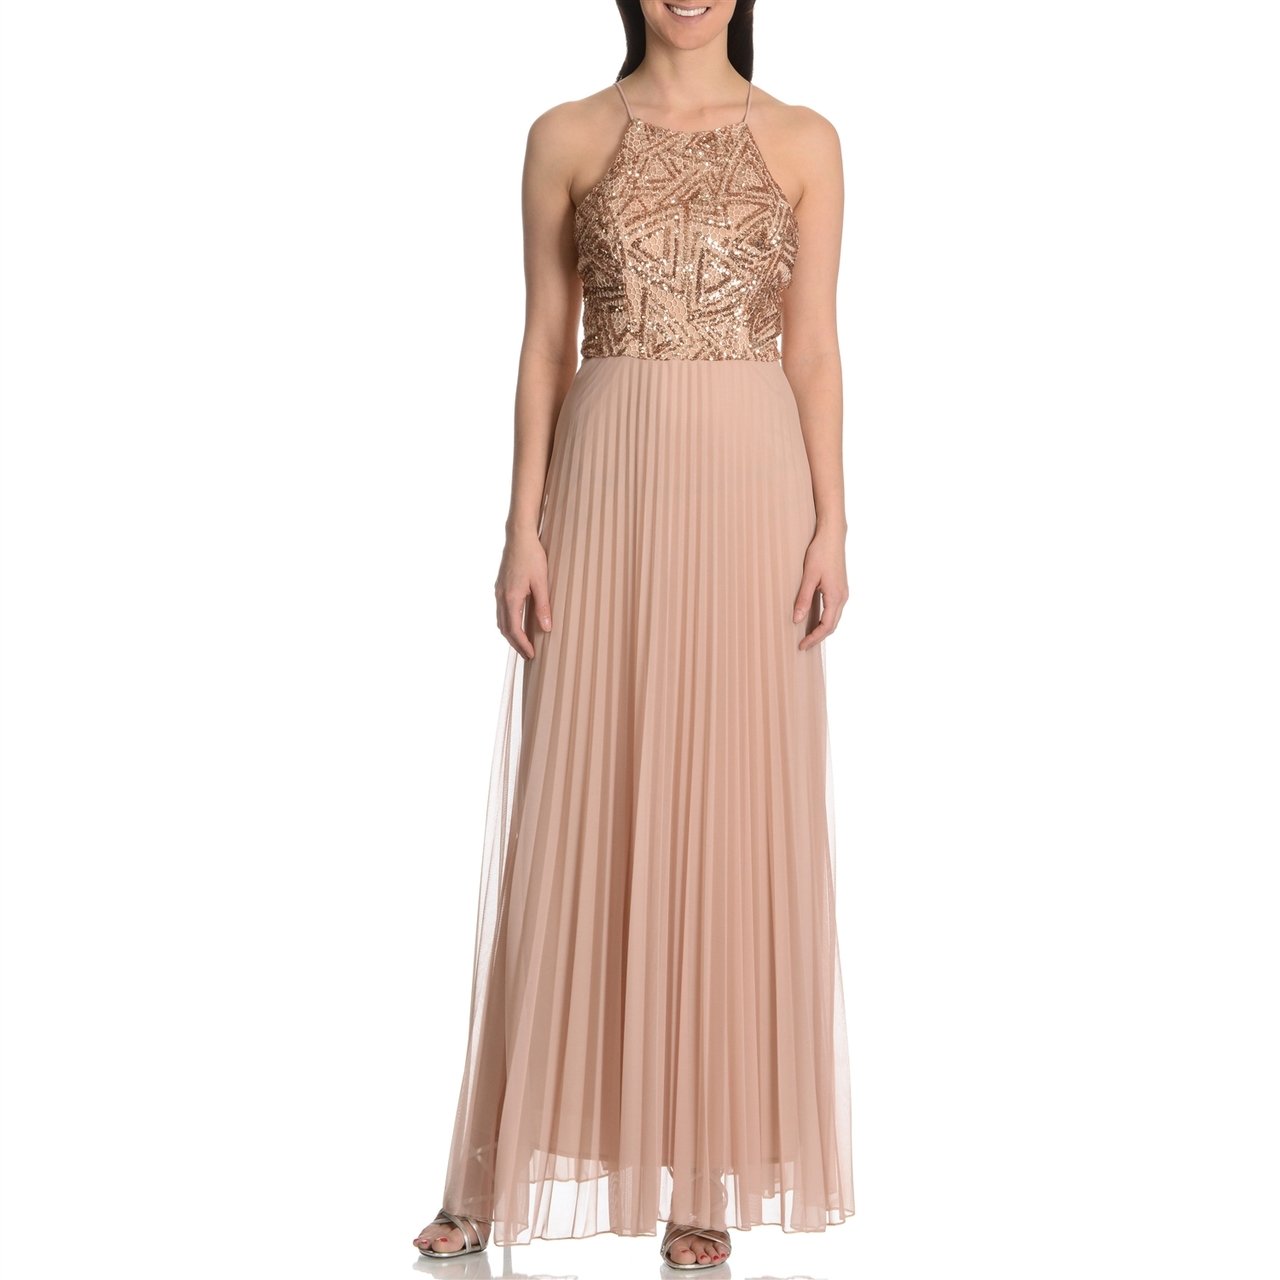 Cachet - 56902 Halter Sequin Pleated Chiffon Dress in Neutral